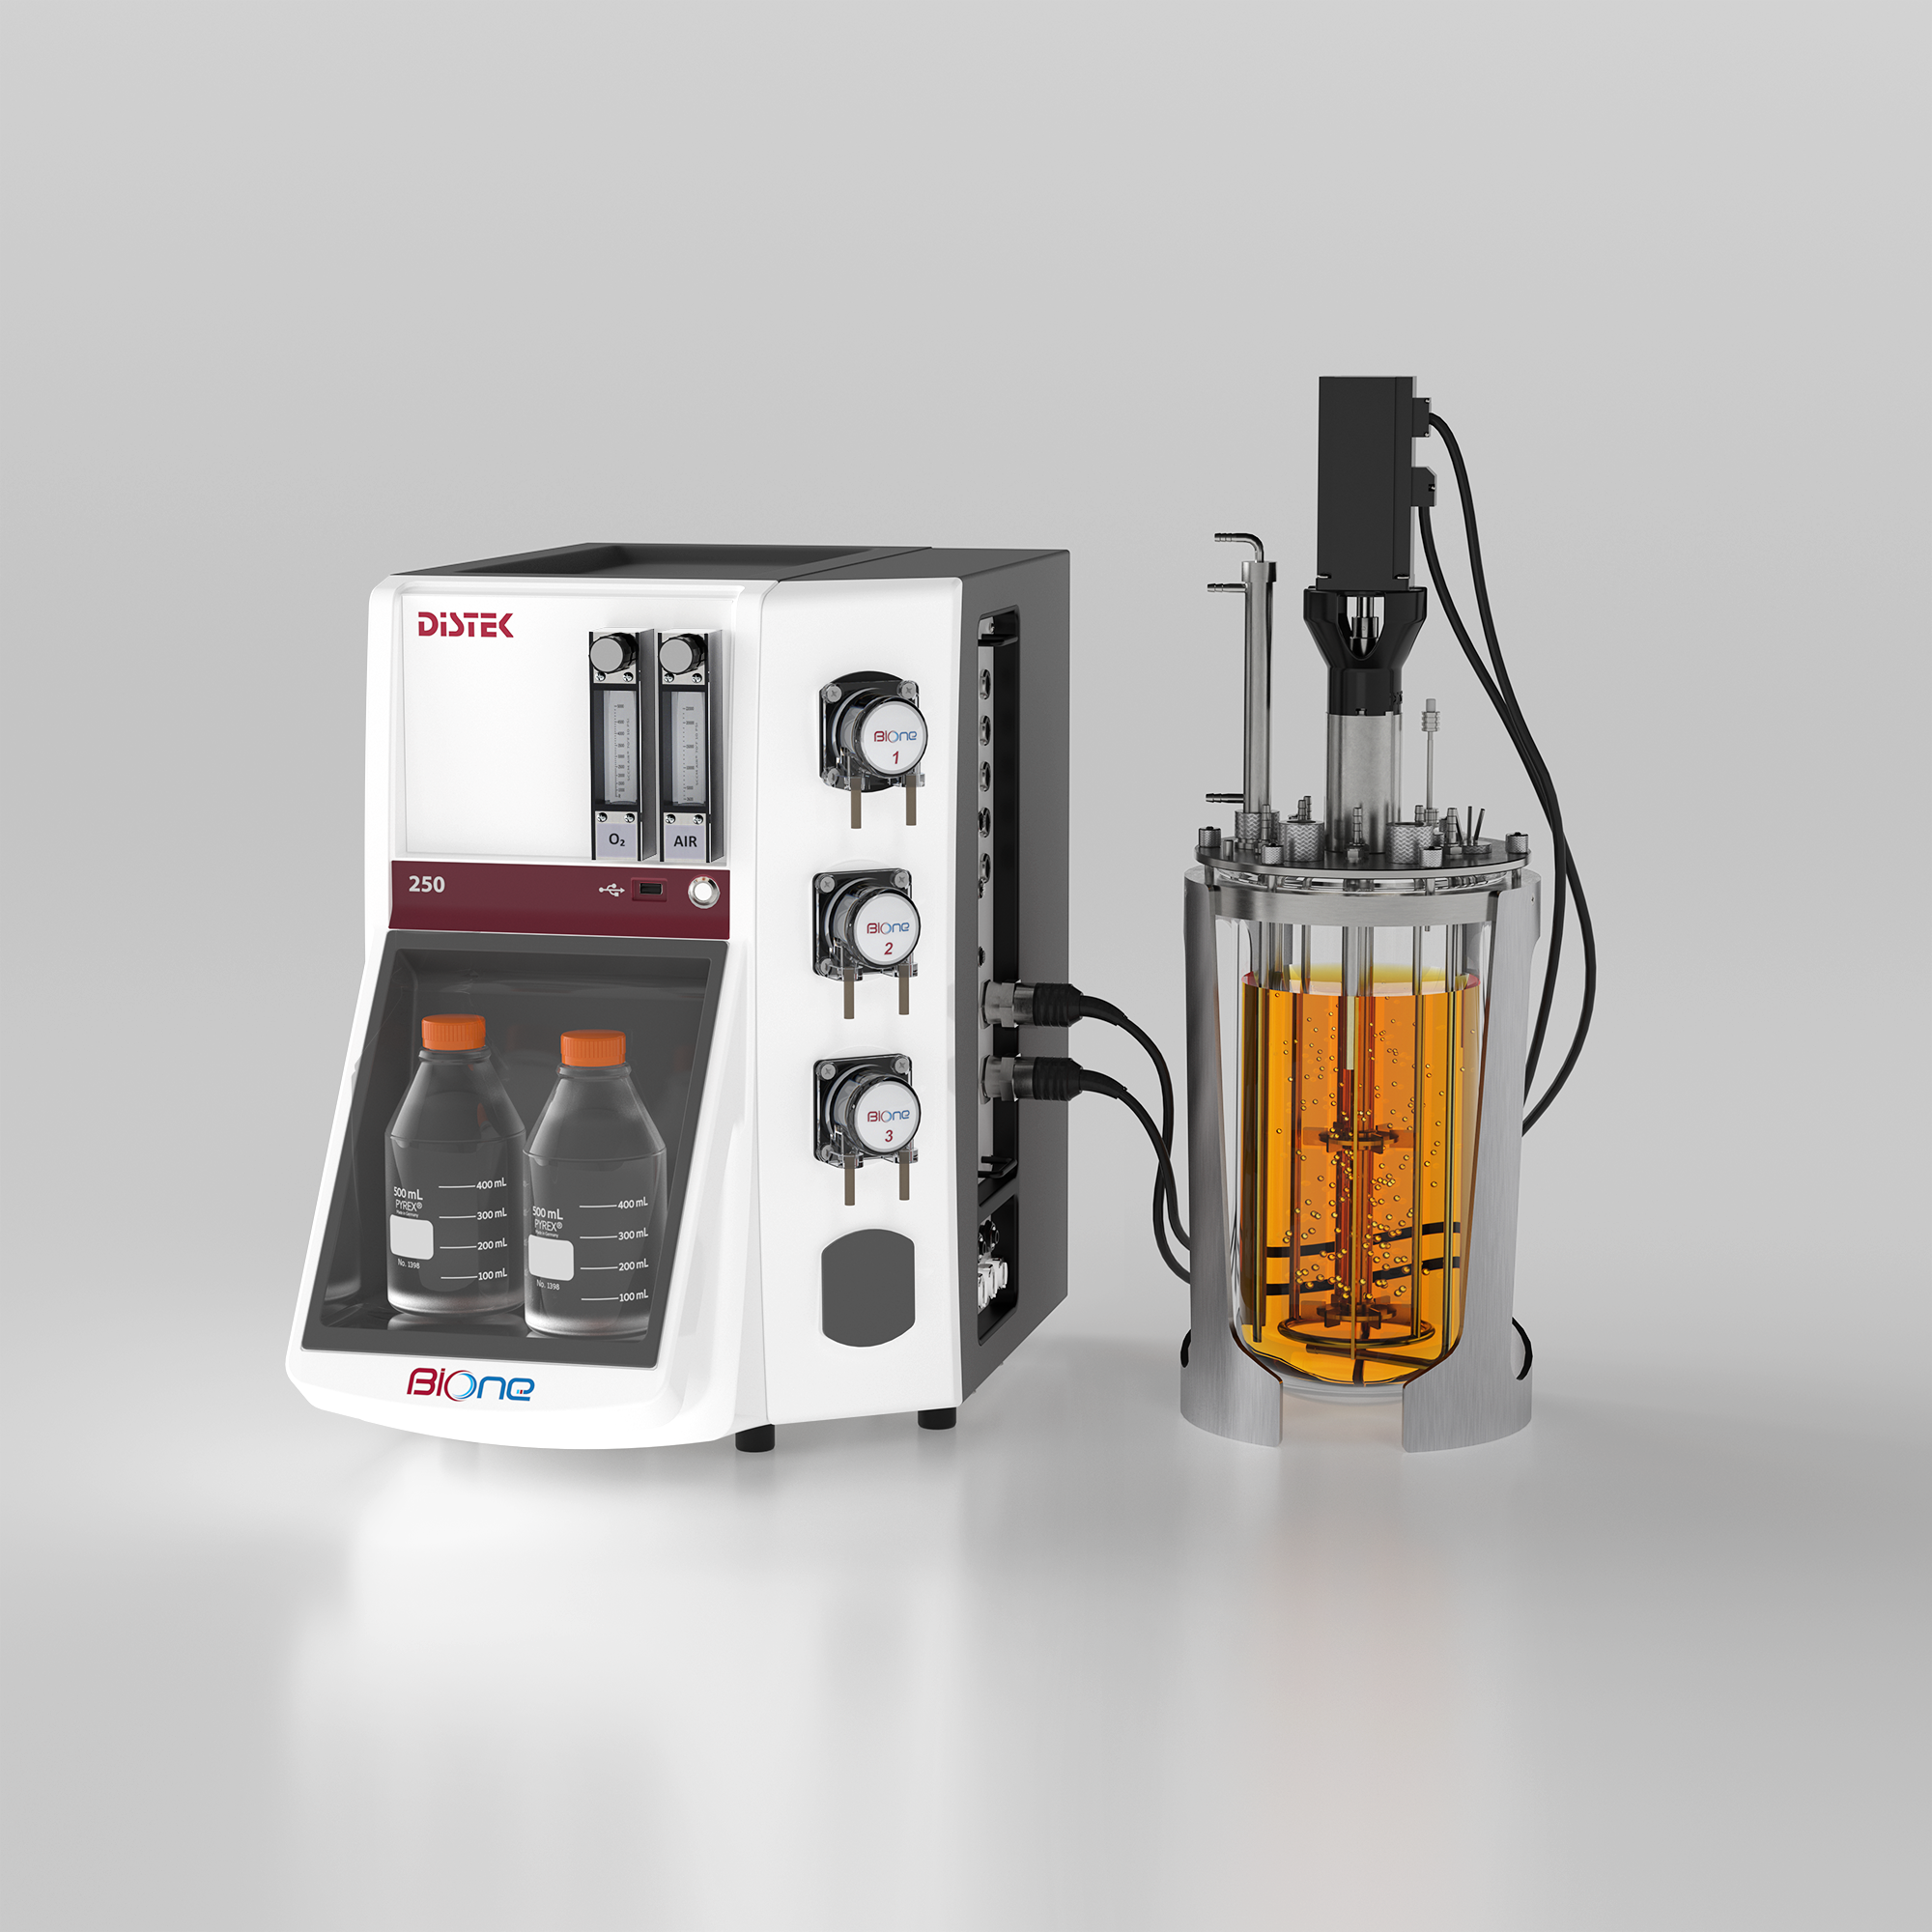 Discover the bione 250: A budget friendly bioprocess control station for microbial applications